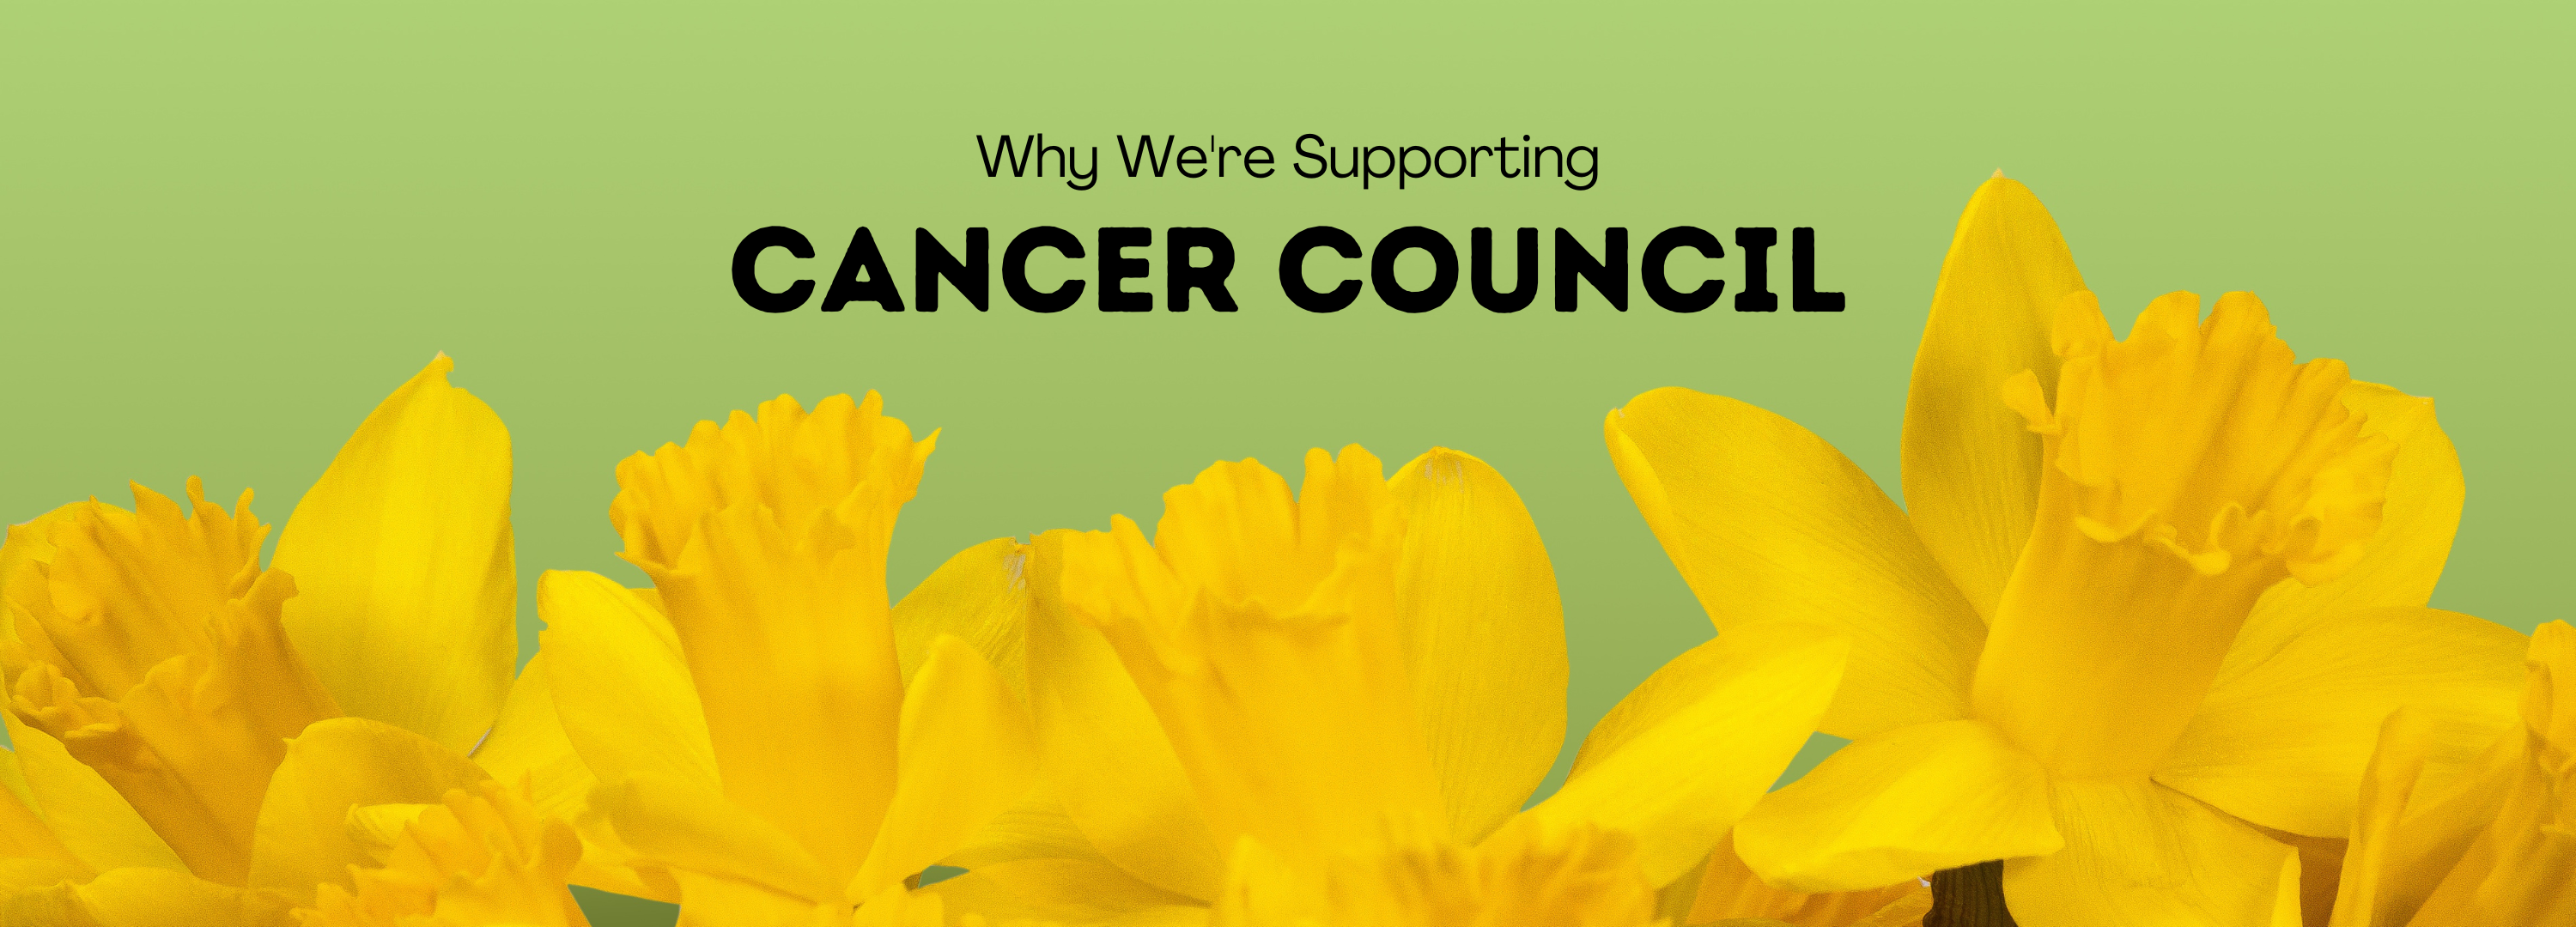 Supporting Cancer Council